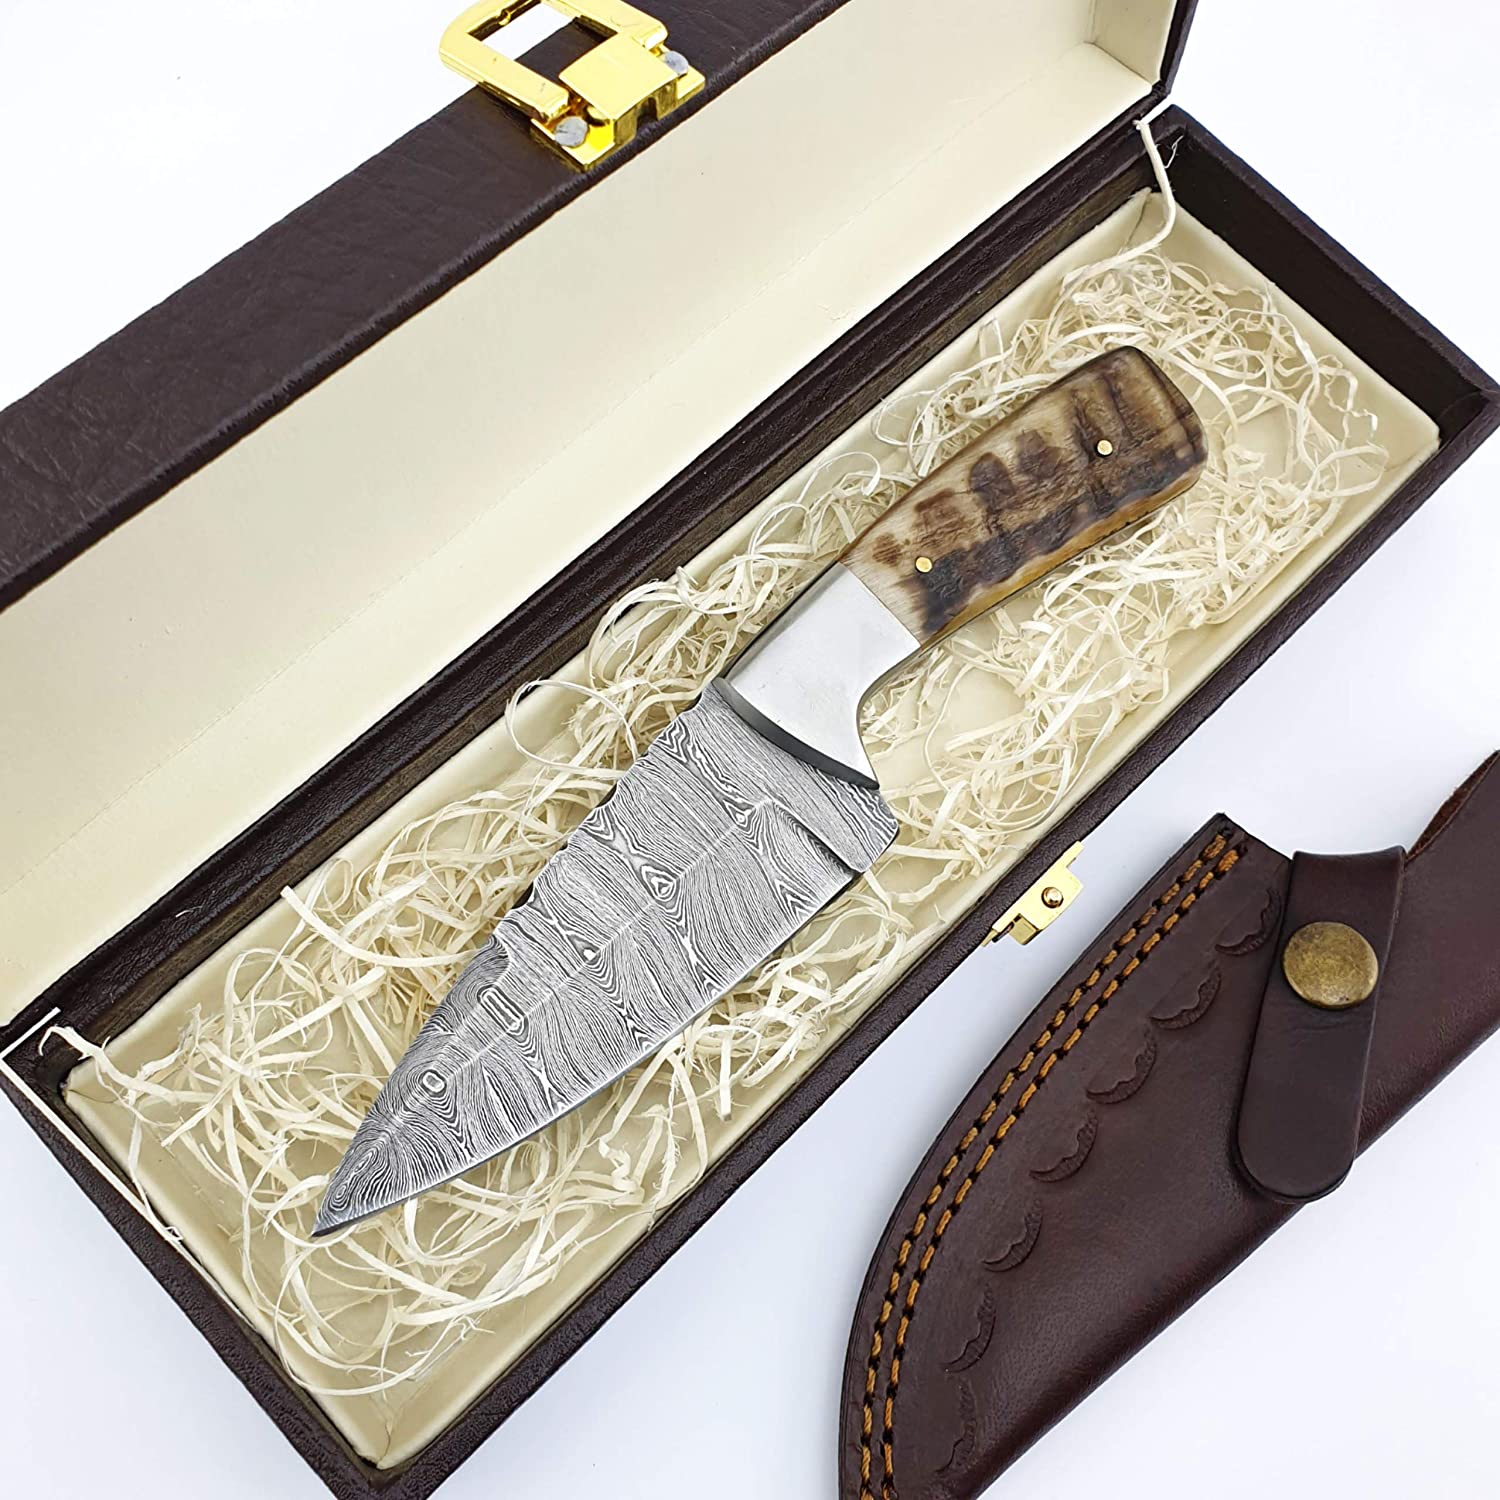 SS-1 Knife4U Damascus Hunting Knife with Sheath|8" Best Camping,Hiking,Tactical,Survival Knife for Men|EDC Bushcraft Accessories Tool|Sharp Blade with Natural Handle and Knife Display Box